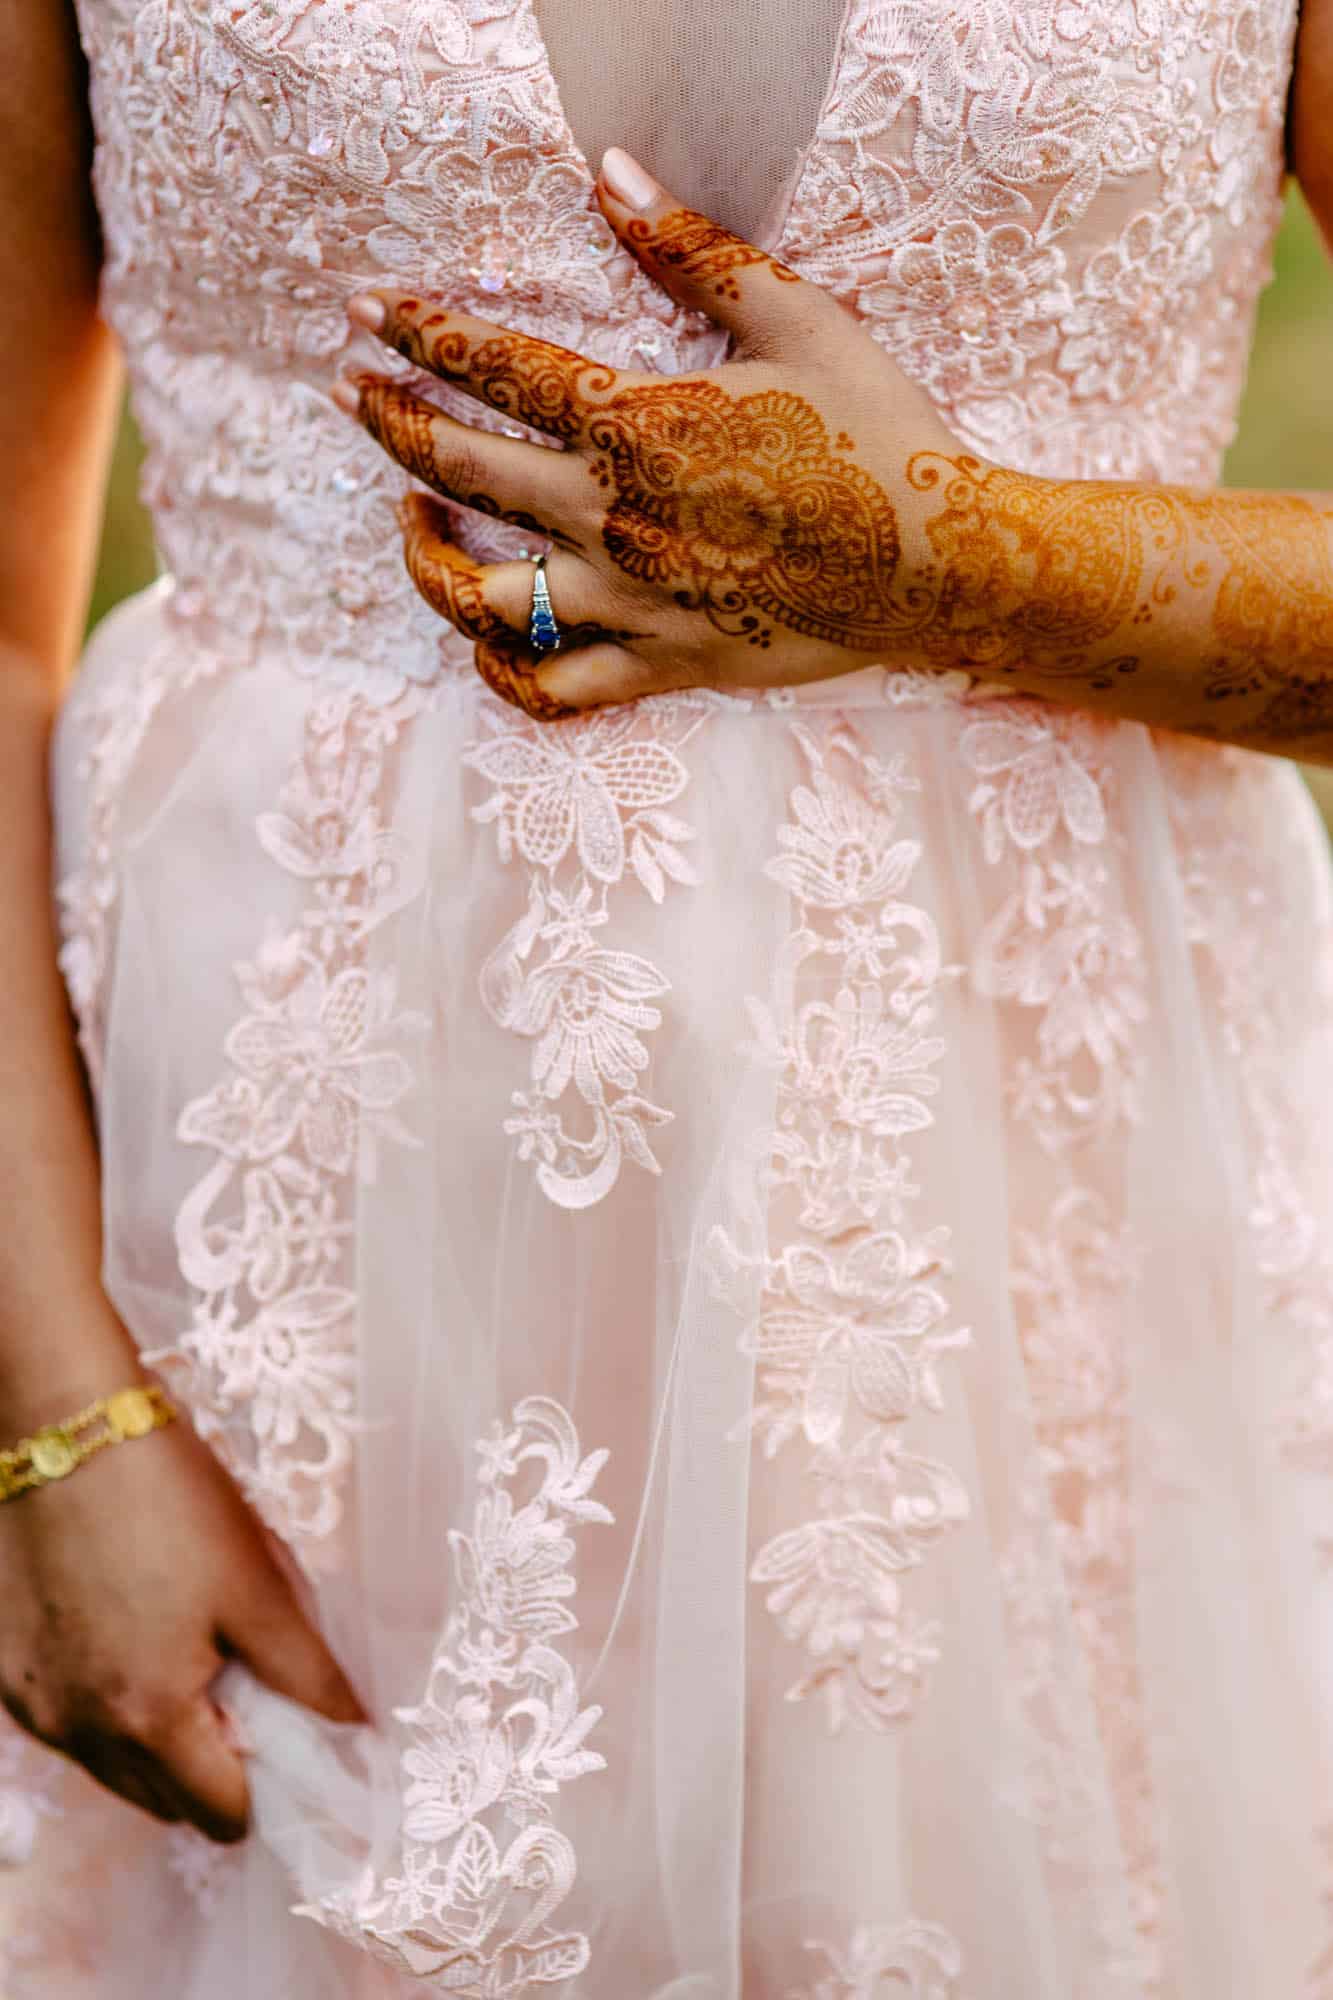 A Bohemian bride in a pink dress with henna on her hands.